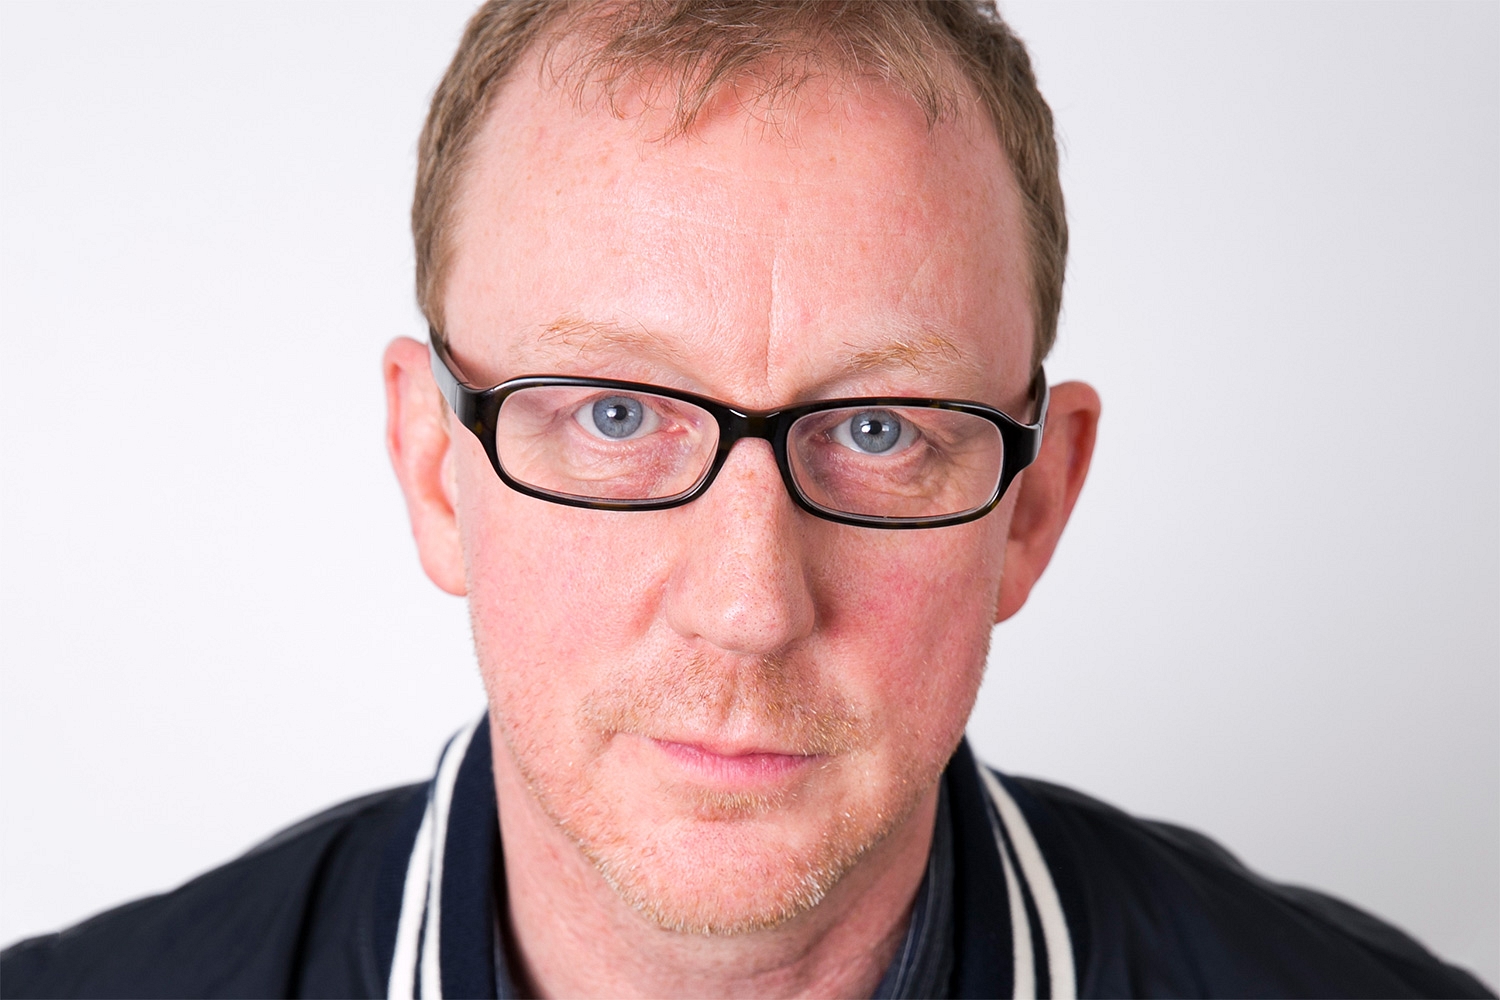 Blur’s Dave Rowntree to give advice at The Great Escape’s CMU:DIY event